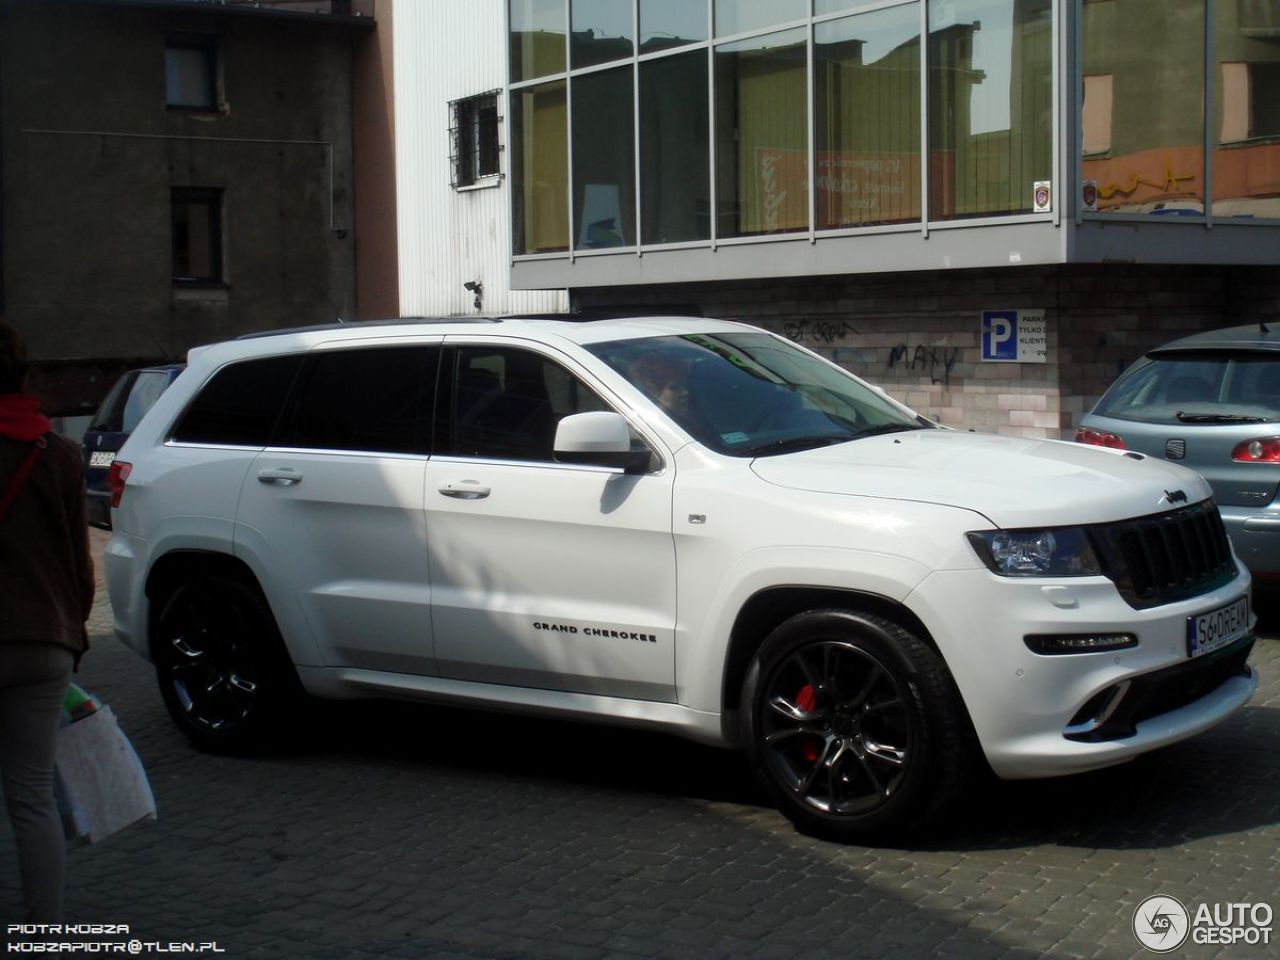 Jeep Grand Cherokee SRT-8 2012 Limited Edition